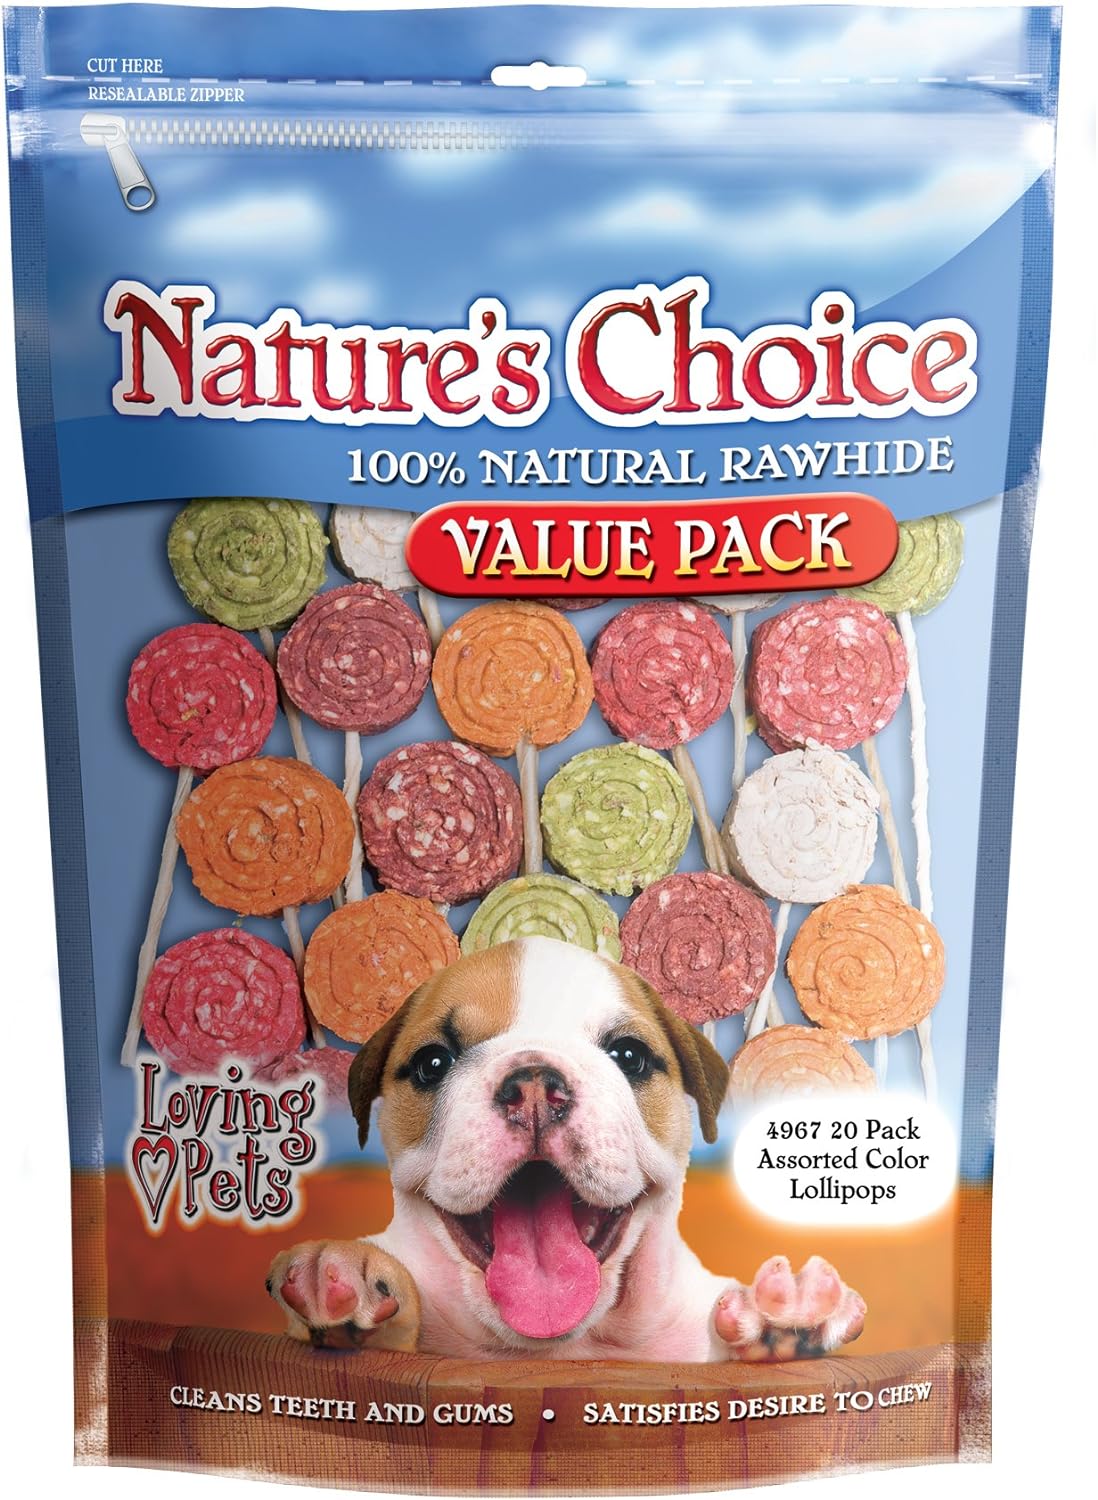 Loving Pets Nature's Choice 100% Natural Rawhide Lollipop with Twist Stick Value Pack Dog Treat, 20/Pack (Assorted Colors)